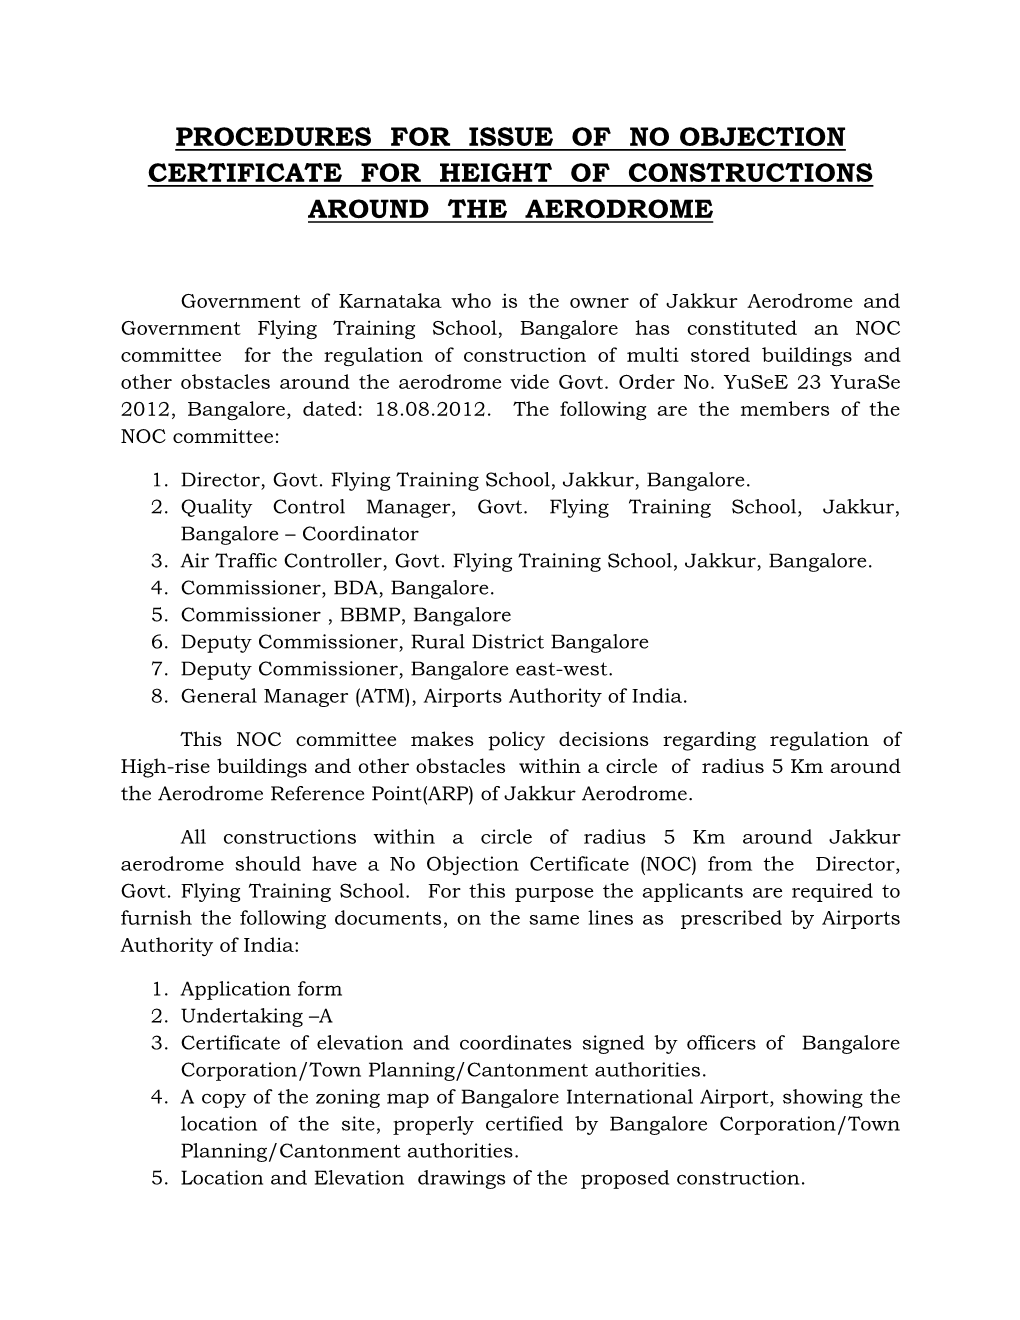 Procedures for Issue of No Objection Certificate for Height of Constructions Around the Aerodrome